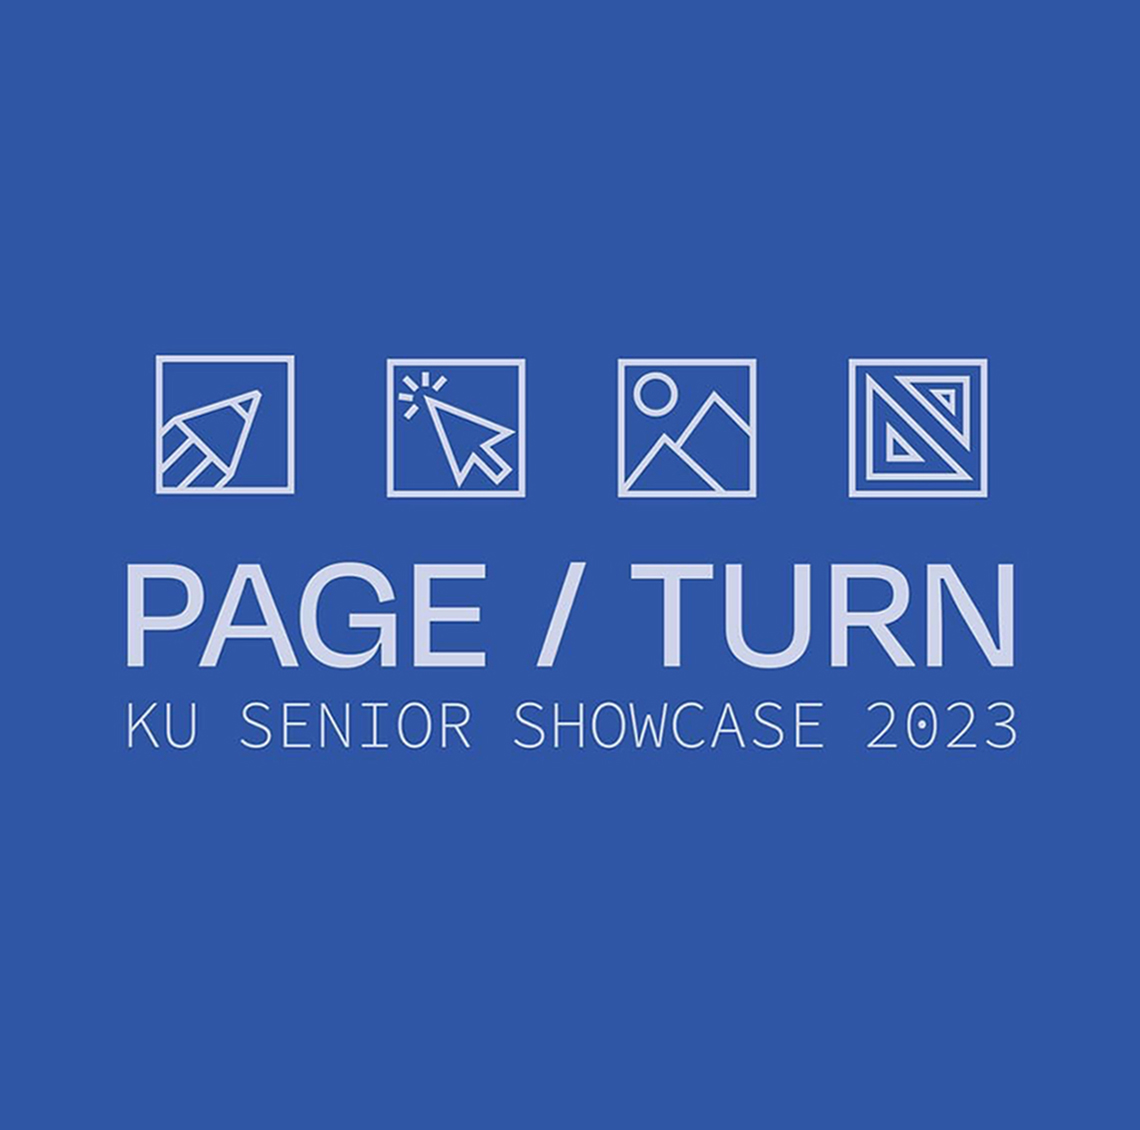 Blue graphic with text that reads 'PAGE / TURN KU Design Senior Showcase'